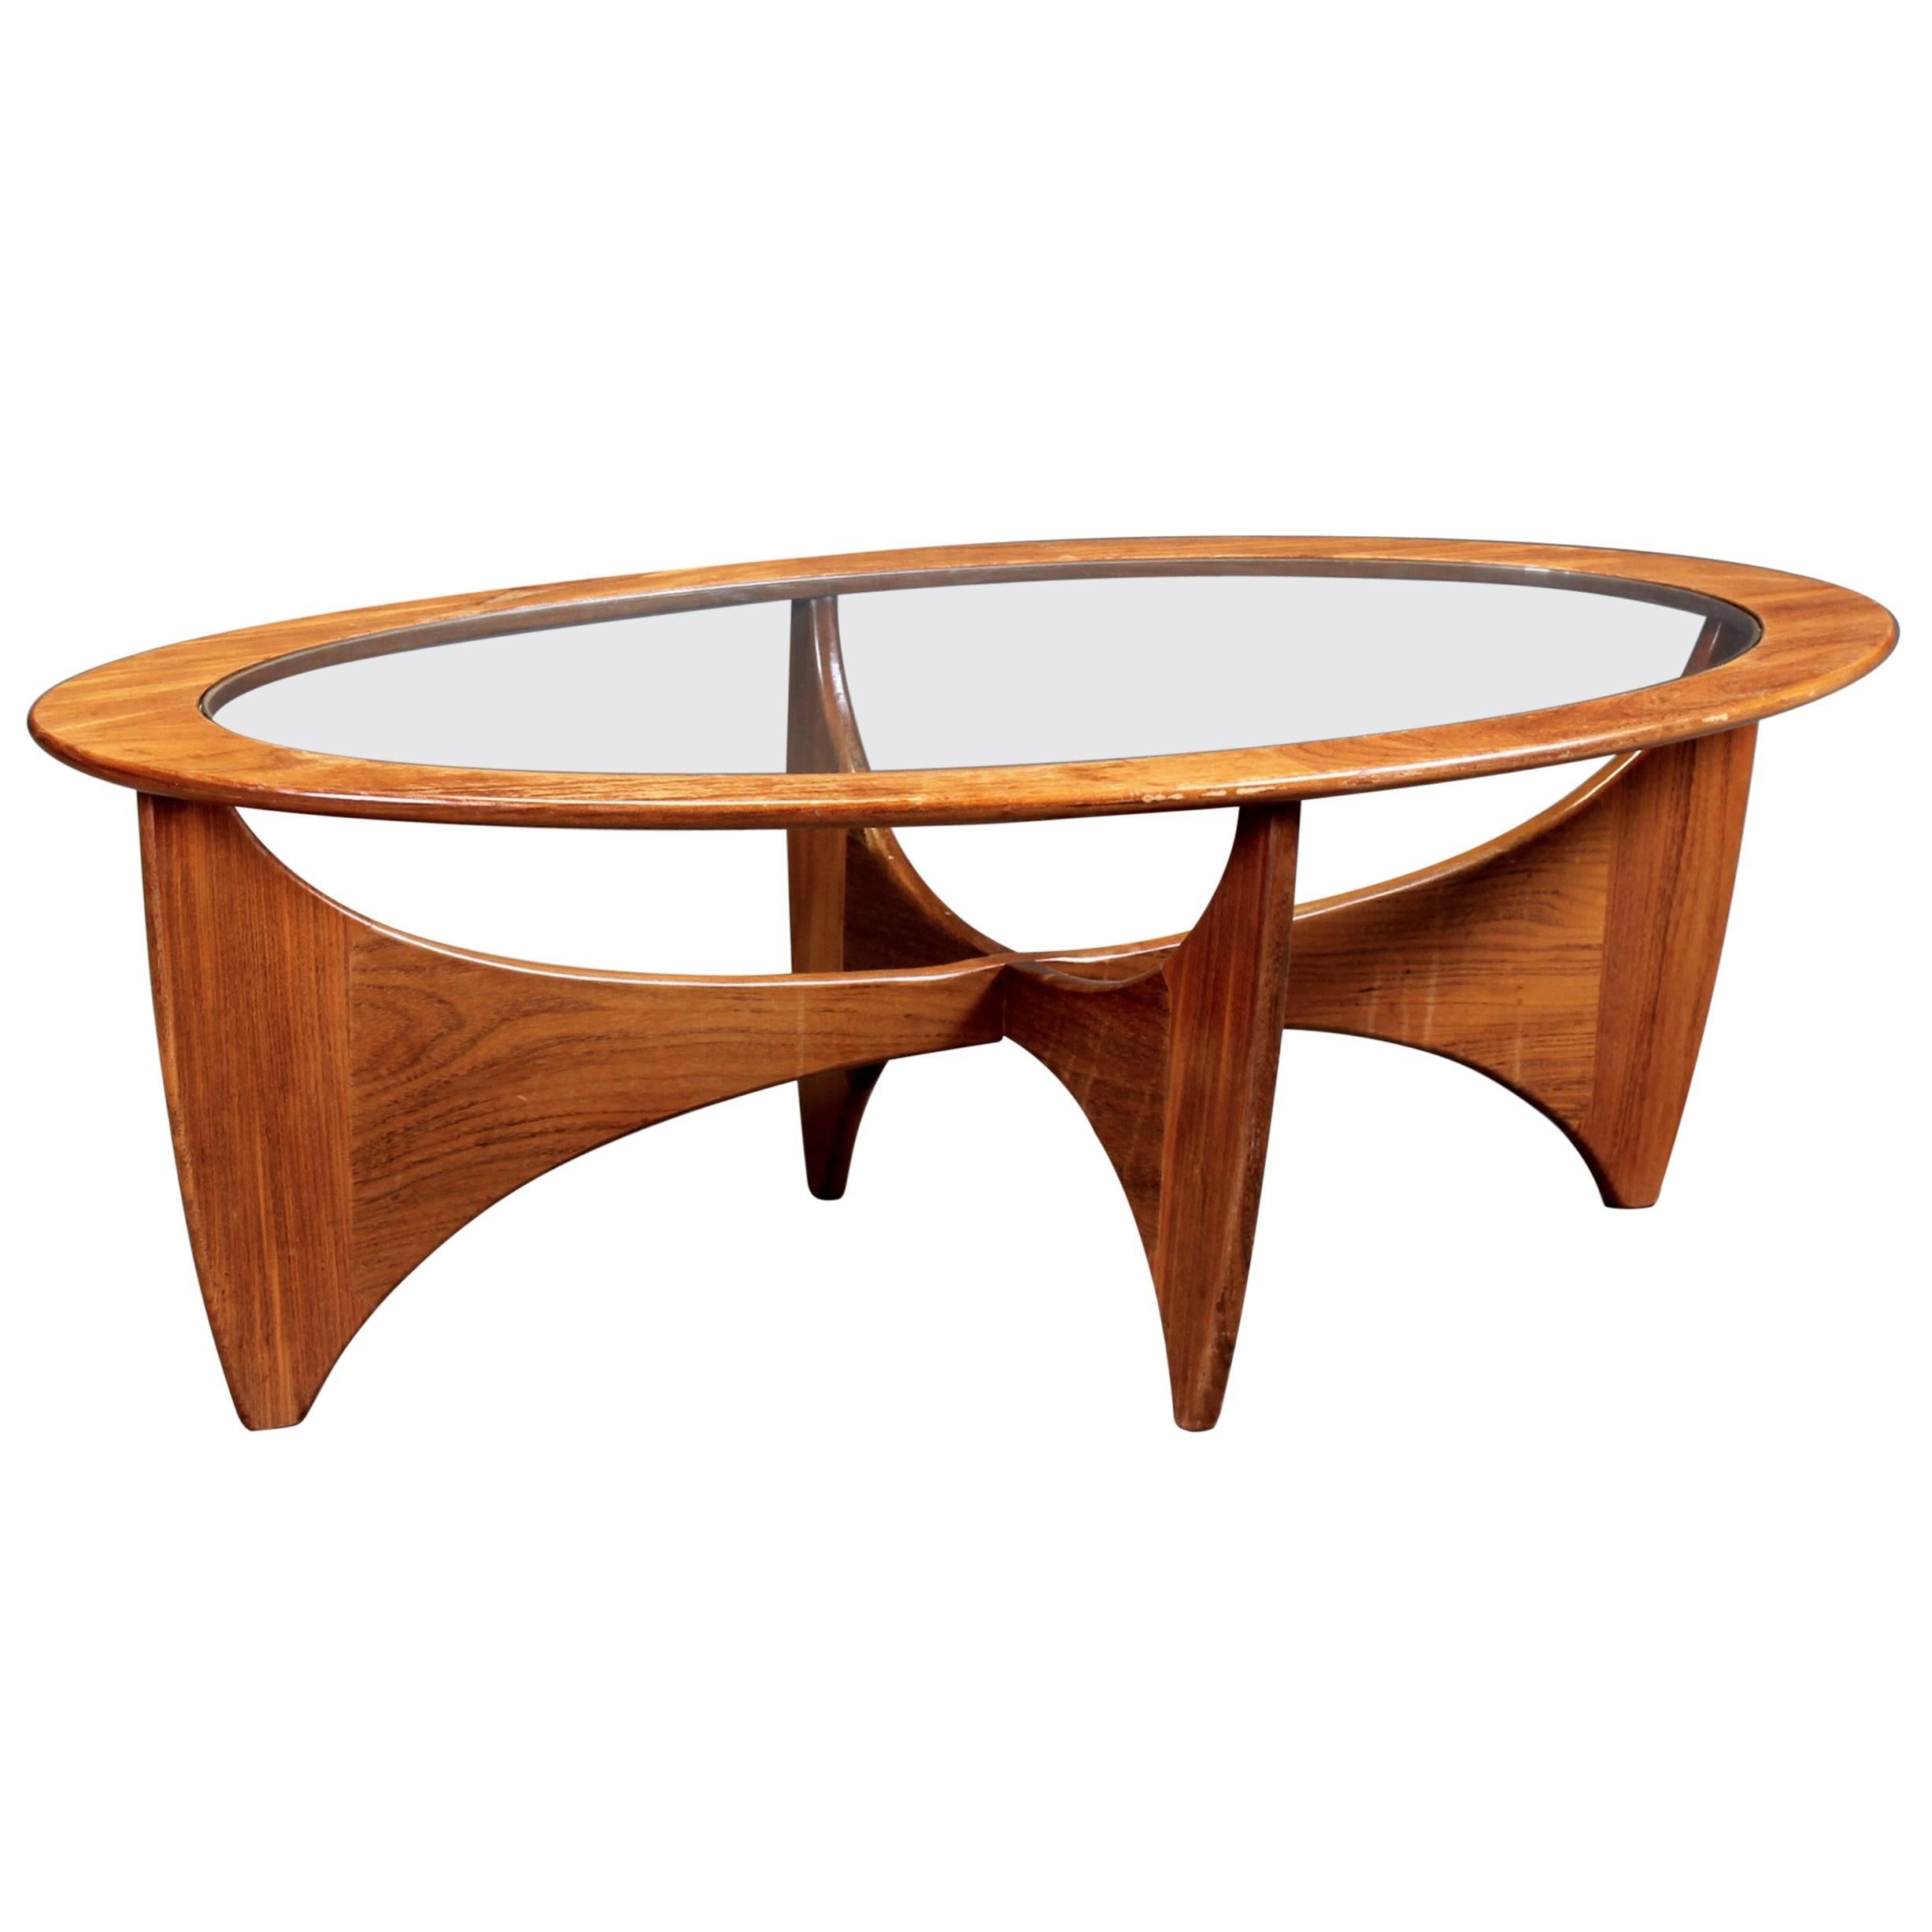 Oval Astro Teak Coffee Table with Glass Top by G-Plan